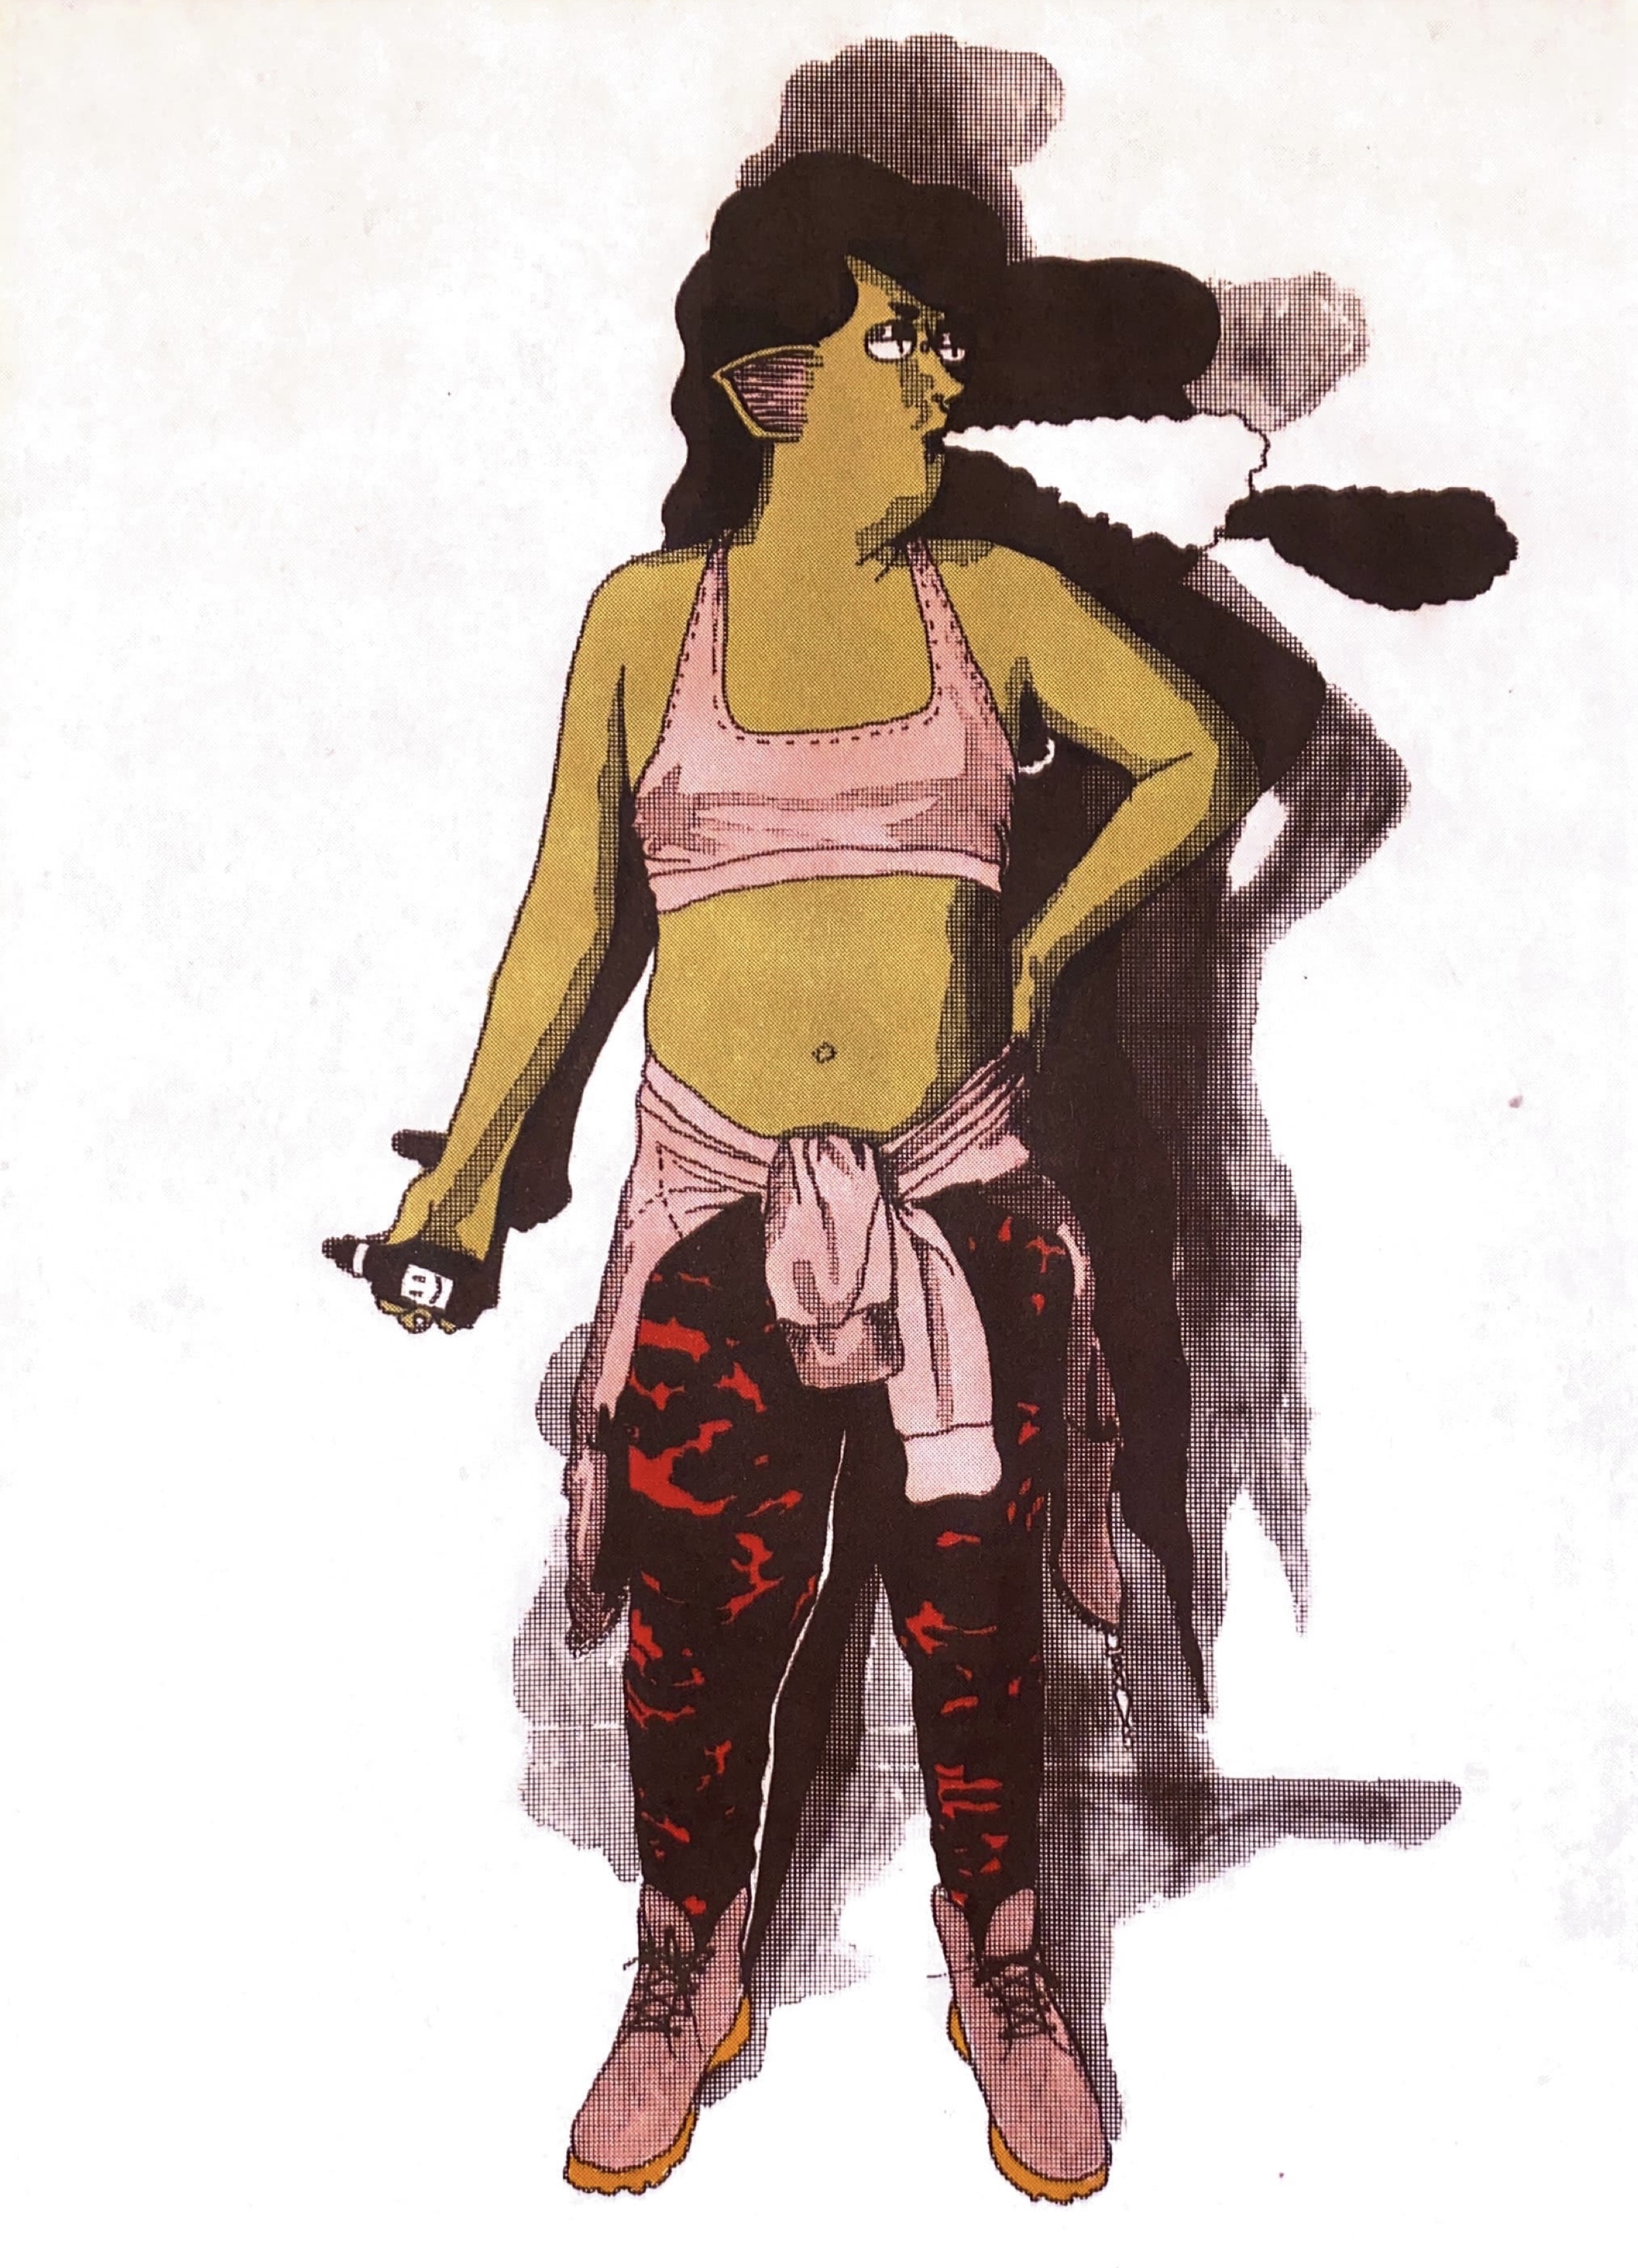 a goblin wearing a sports bra and joggers with a sweater tied around her waist up against the implication of a brick wall, as seen in the shadows of the image, she's exhaling after hitting a tank mod vape, the shadows and blacks have a cross style halftone pattern, and the colors are warm greens and pinks and red